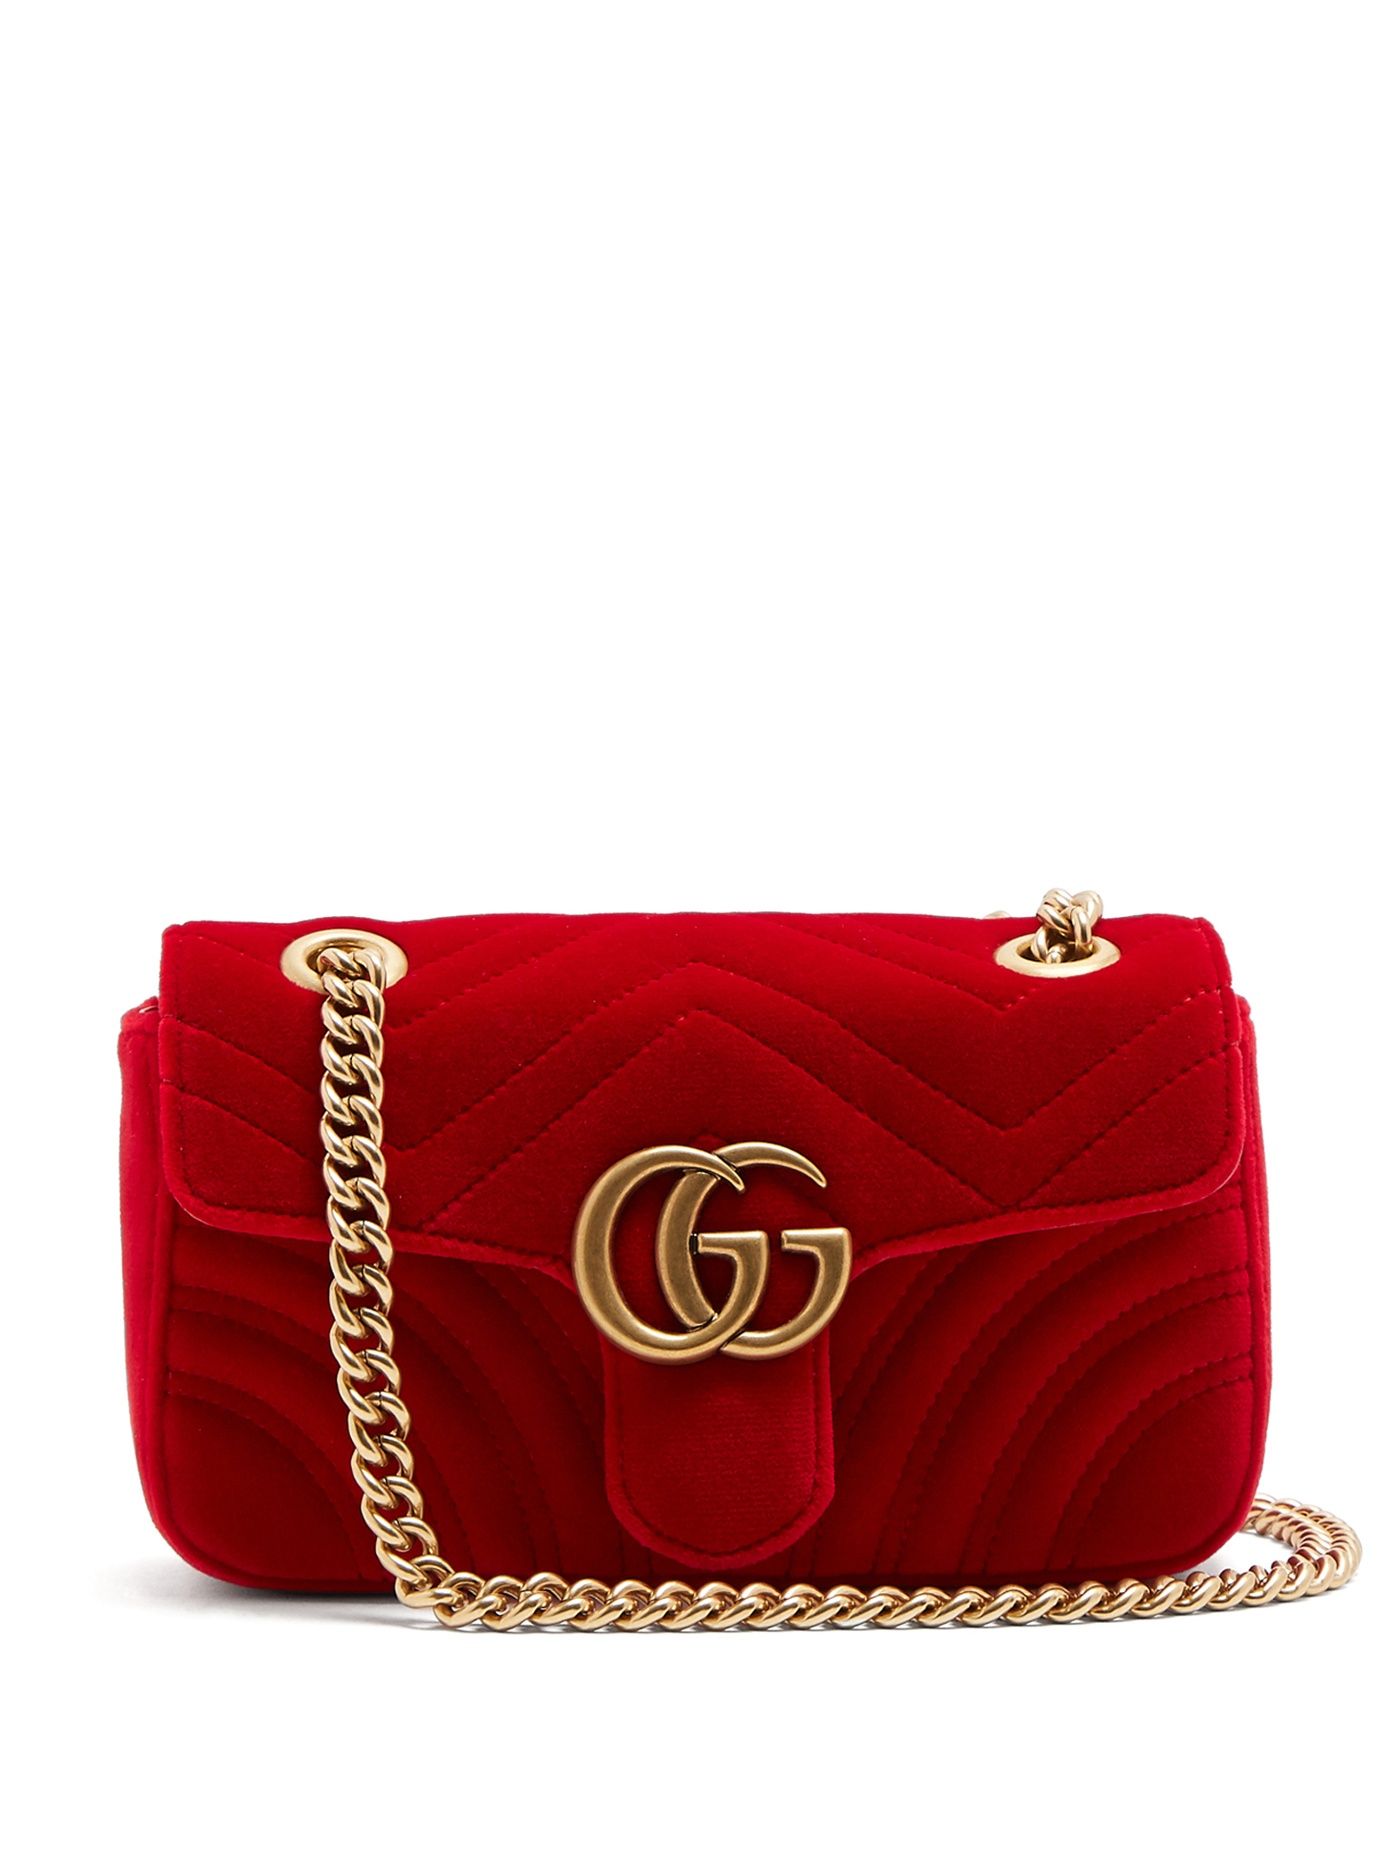 gucci red marmont bag small